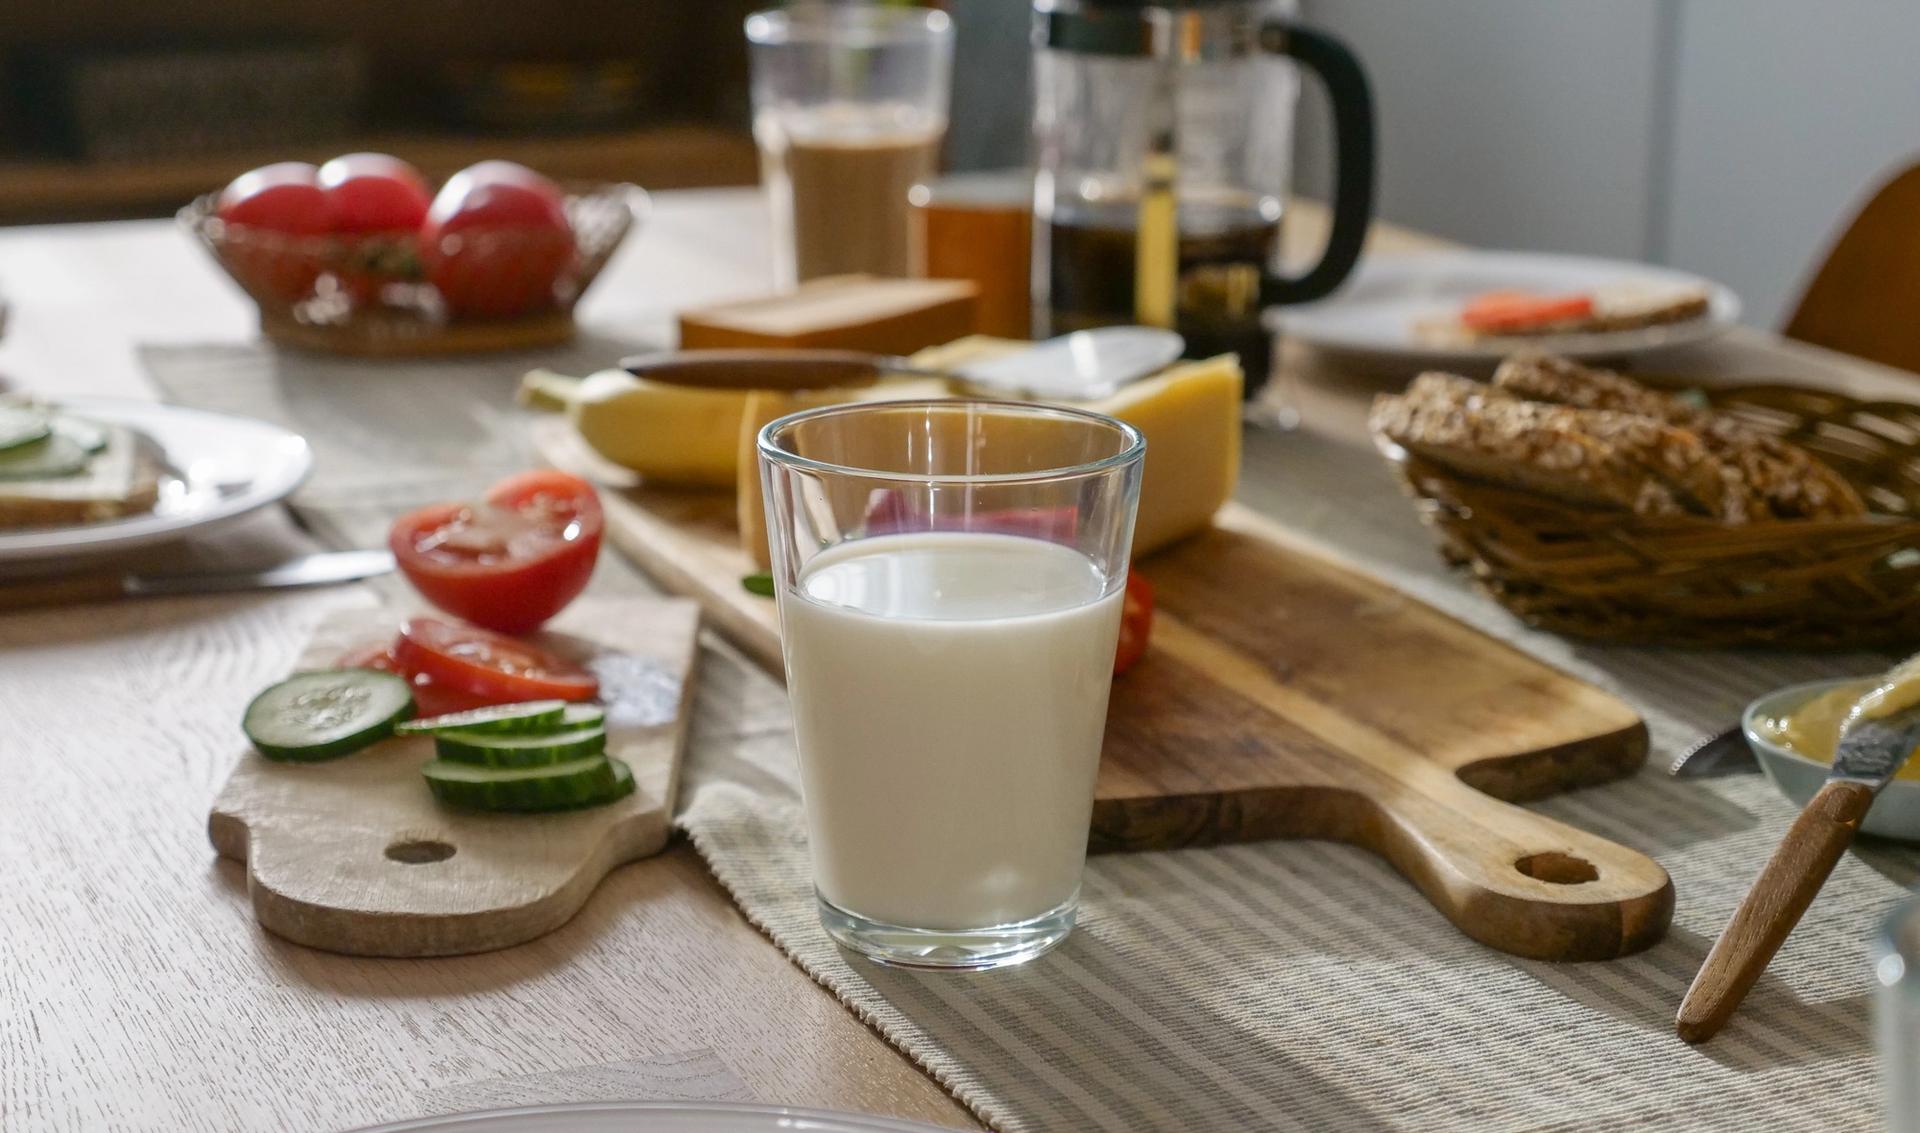 a glass of milk is sitting on a wooden table next to a cutting board with vegetables .